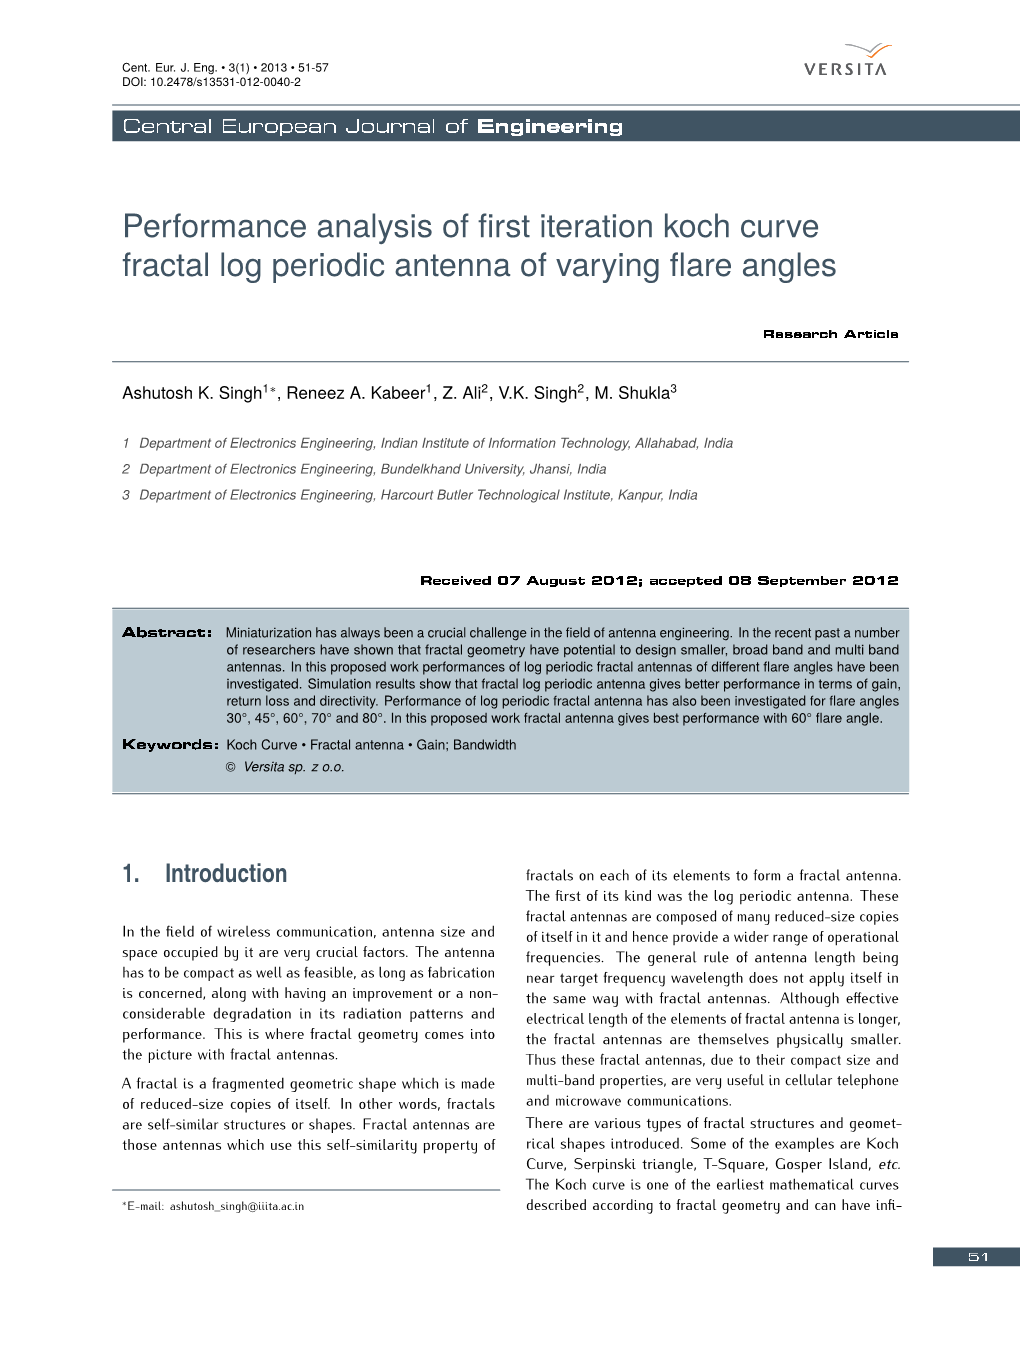 Performance Analysis of First Iteration Koch Curve Fractal Log Periodic